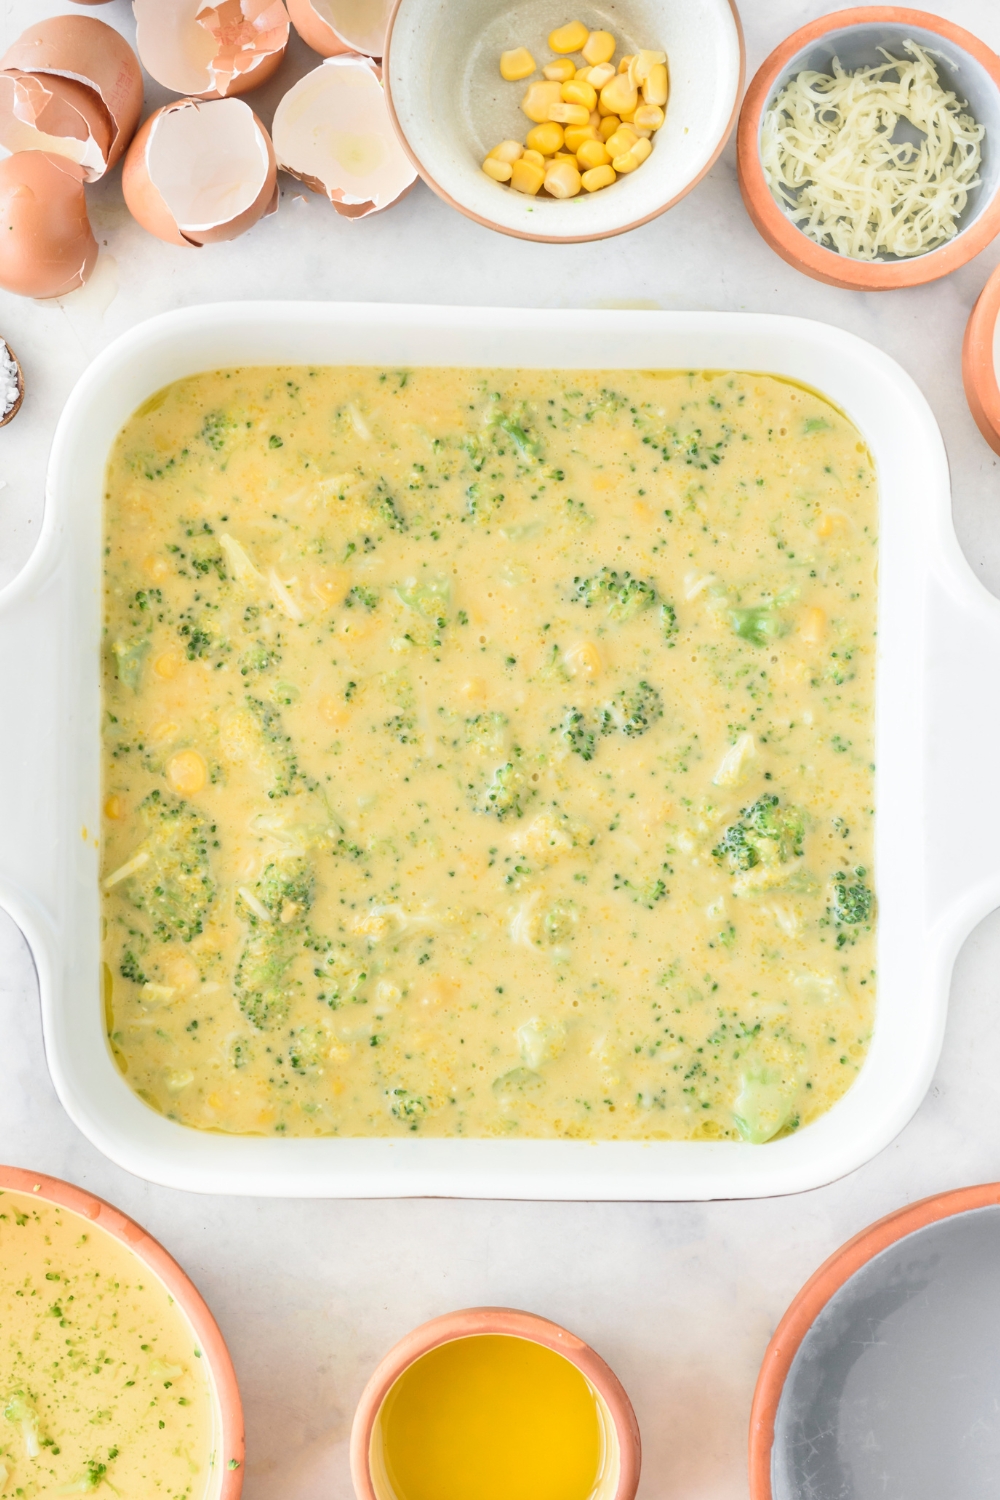 A square baking dish filled with cornbread batter with chunks of broccoli and whole corn kernels.